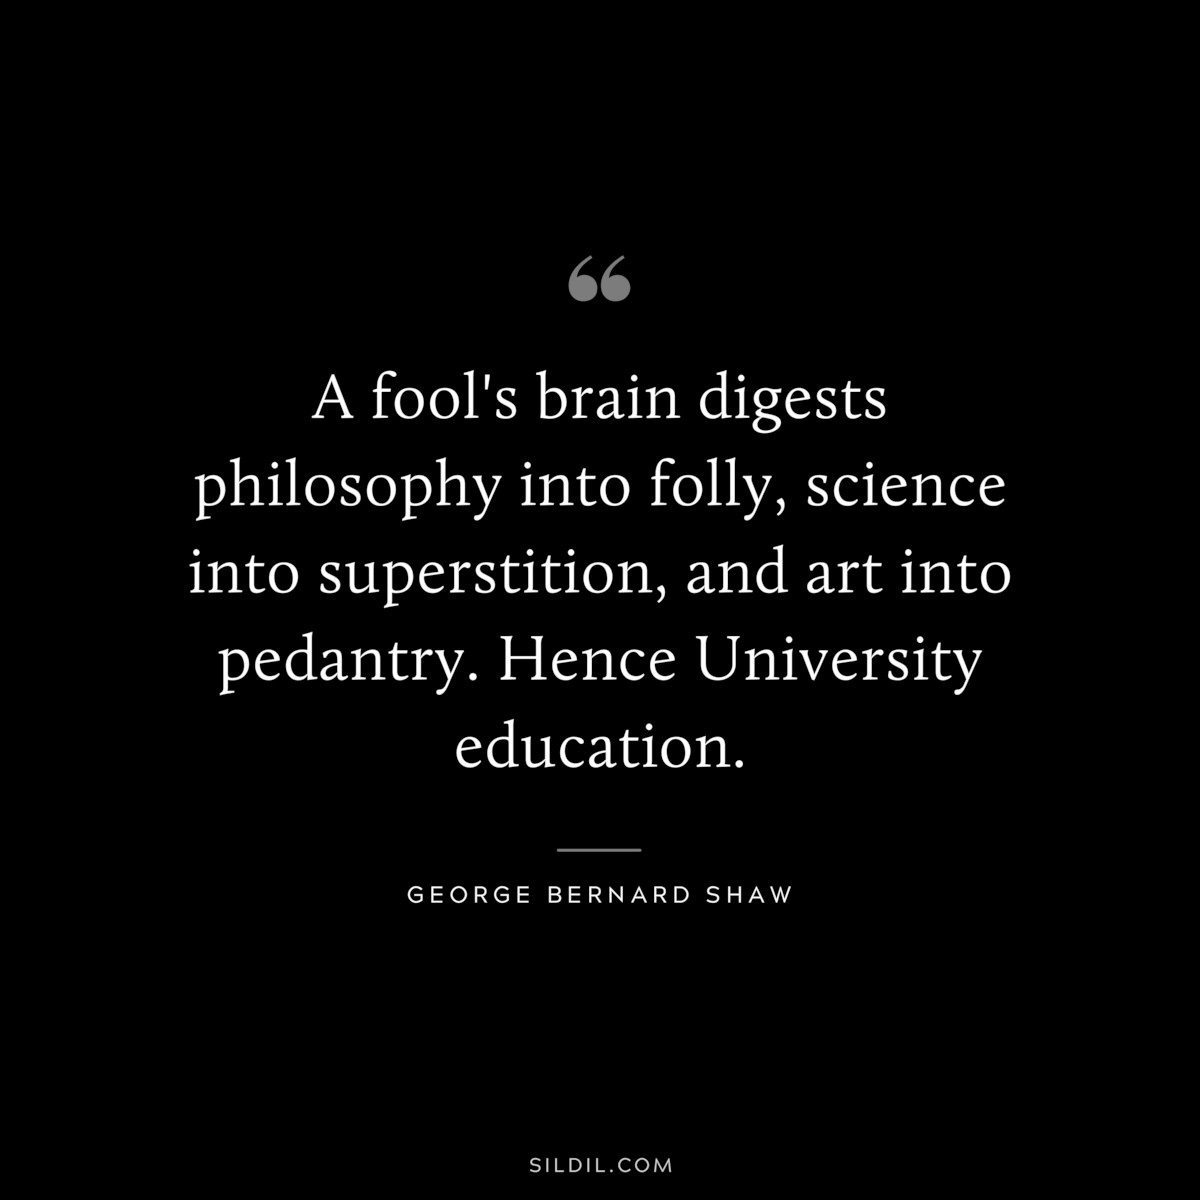 A fool's brain digests philosophy into folly, science into superstition, and art into pedantry. Hence University education. ― George Bernard Shaw